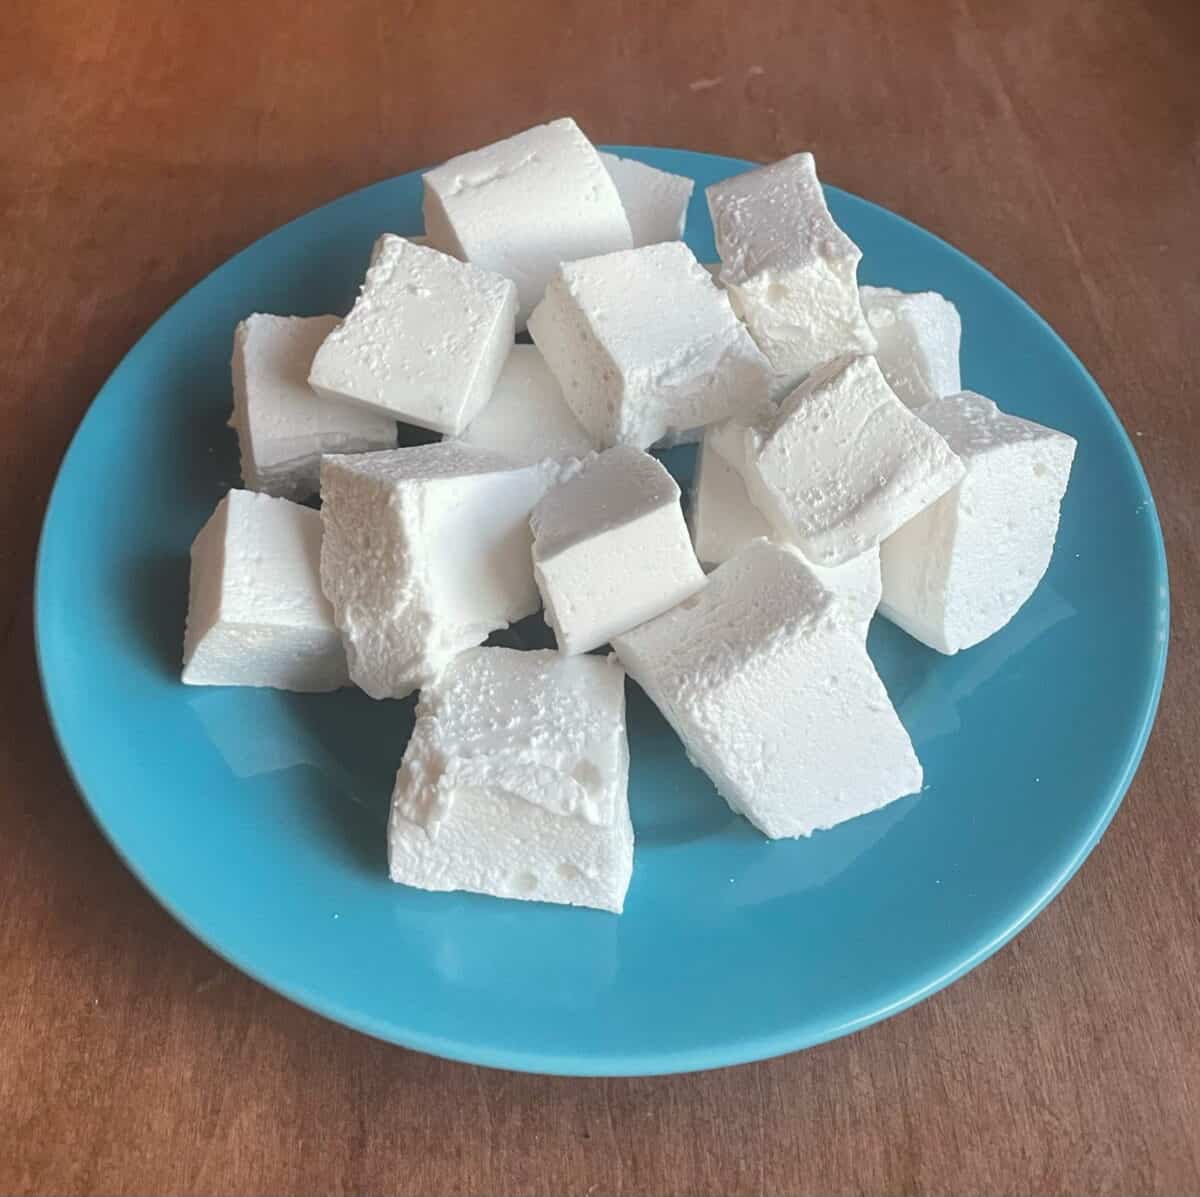 squares of roughly cut marshmallows on a blue plate.